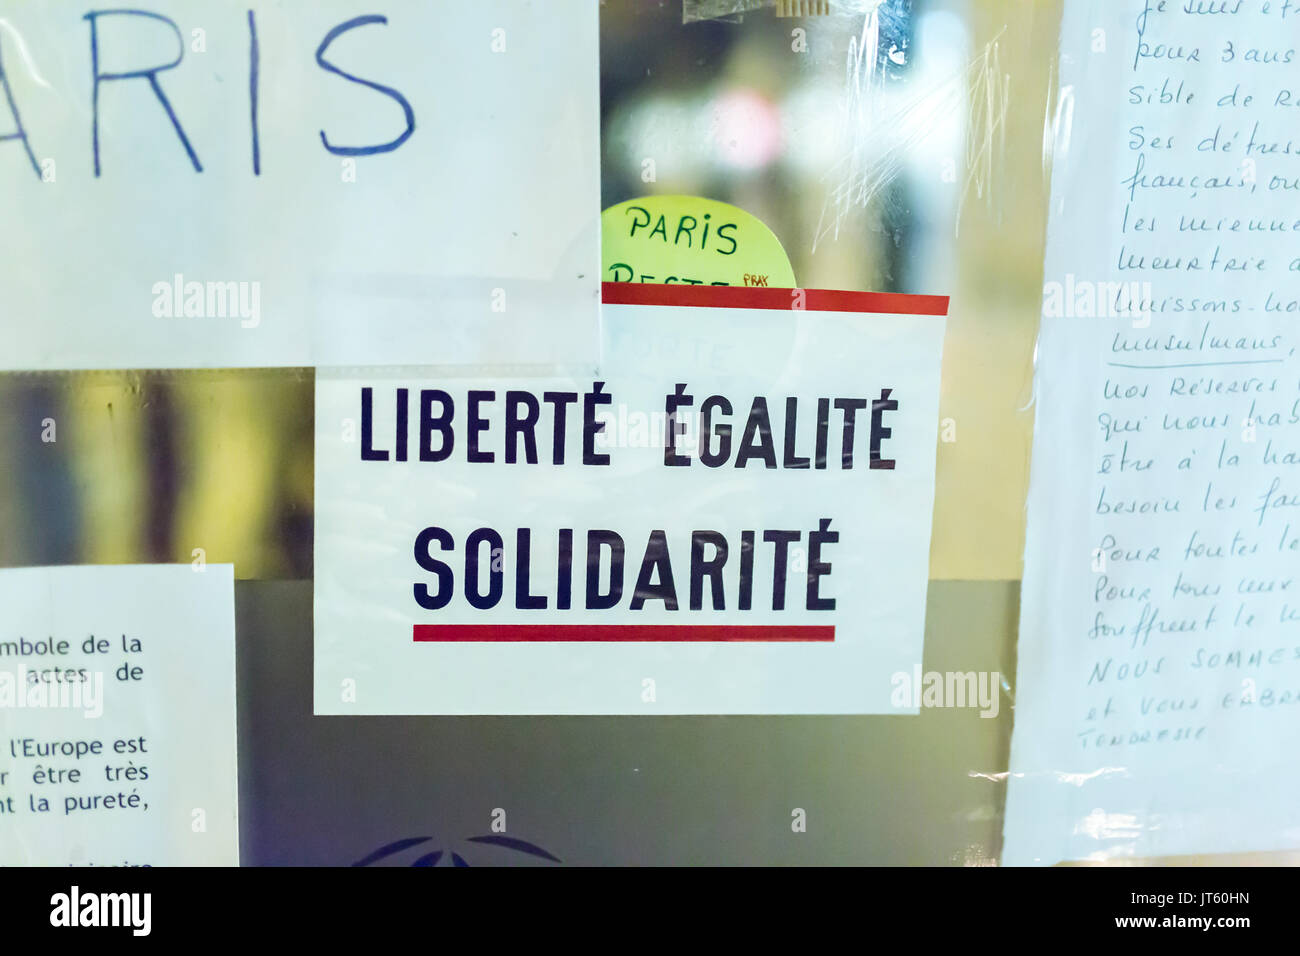 liberté égalité solidarité liberty equality solidarity. Spontaneous homage at the victims of the terrorist attacks in Paris the 13th of november 2015. Stock Photo